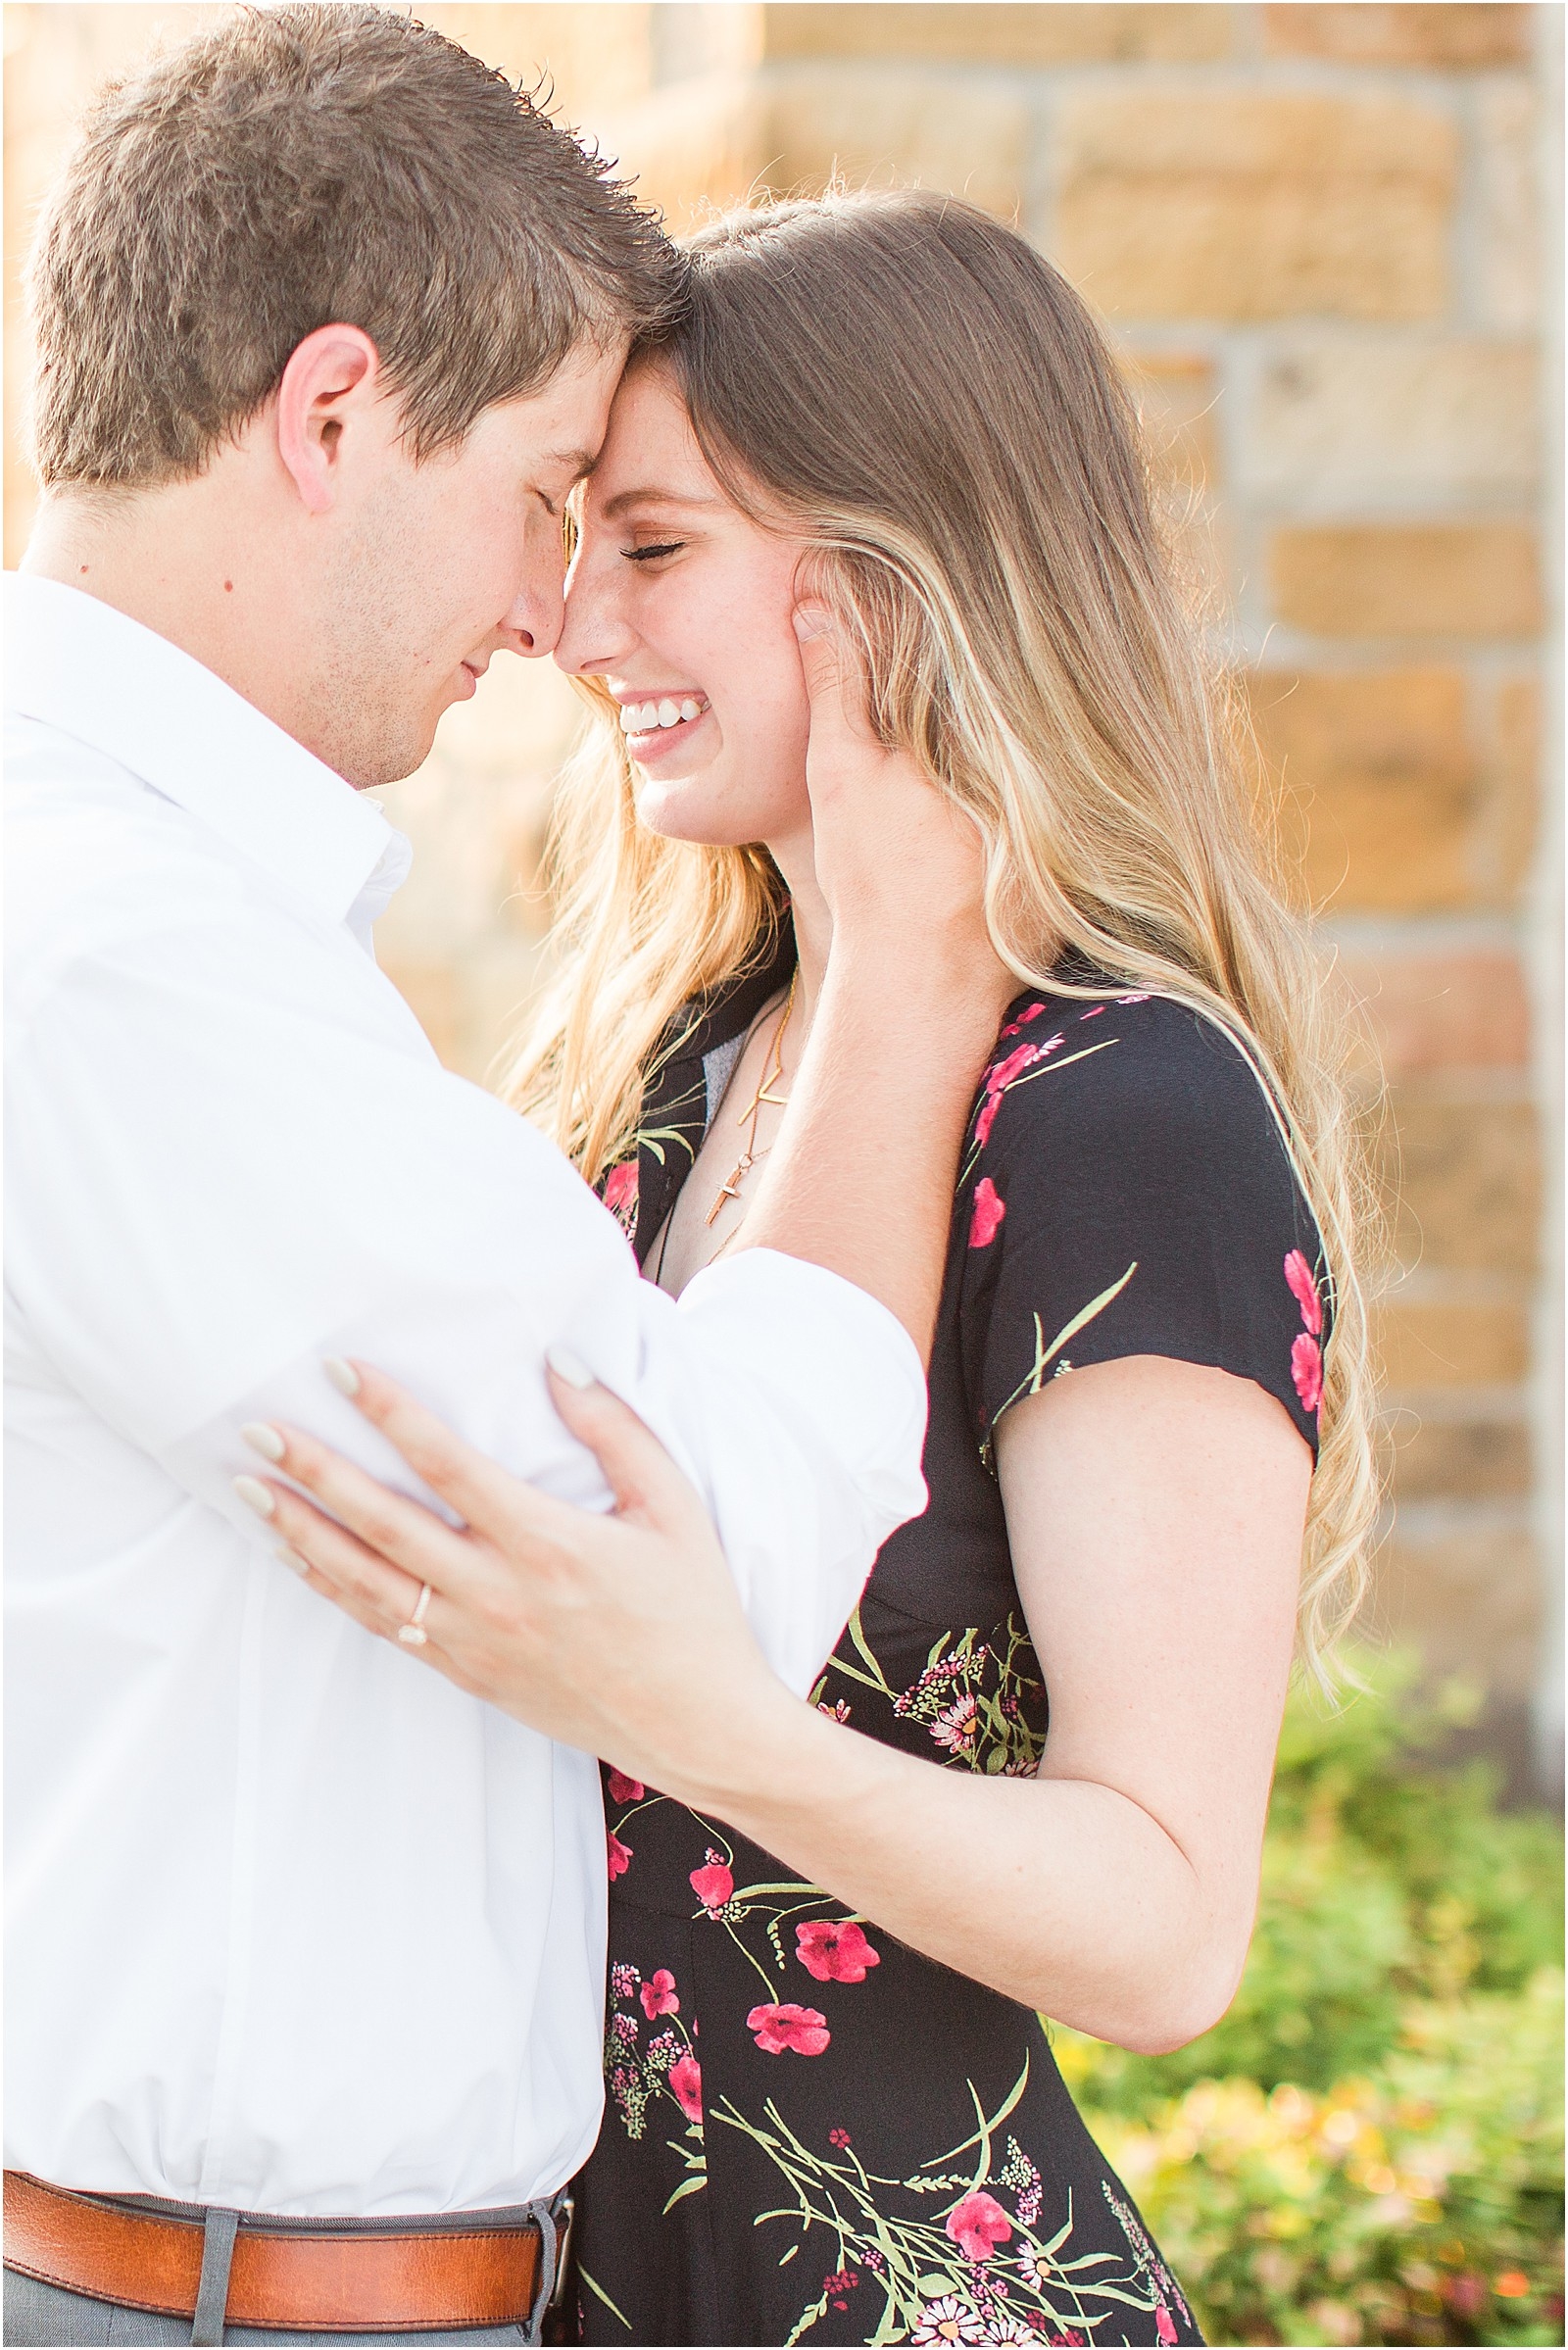 A Jasper Indiana Engagement Session | Tori and Kyle | Bret and Brandie Photography023.jpg